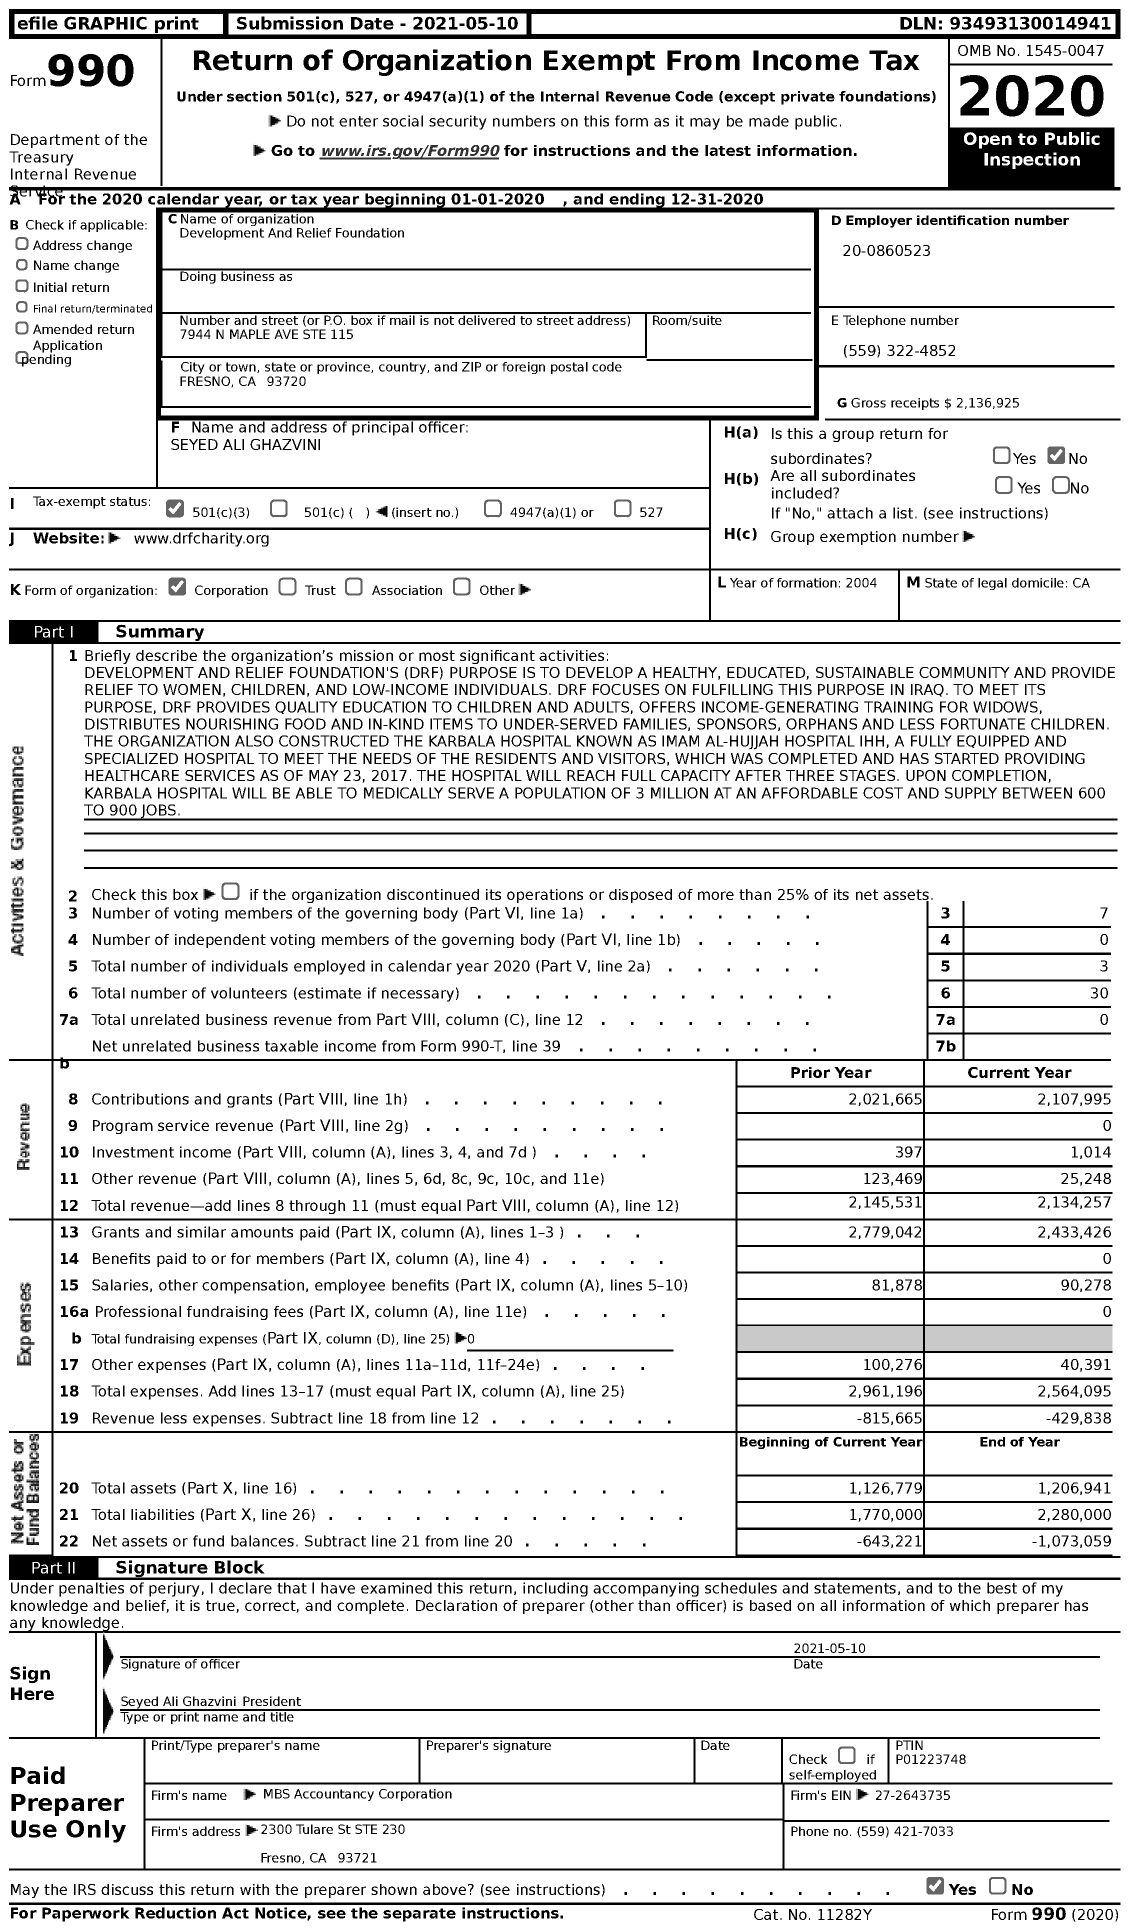 Image of first page of 2020 Form 990 for ATTN: Seyed Ali Ghazvini (DRF)